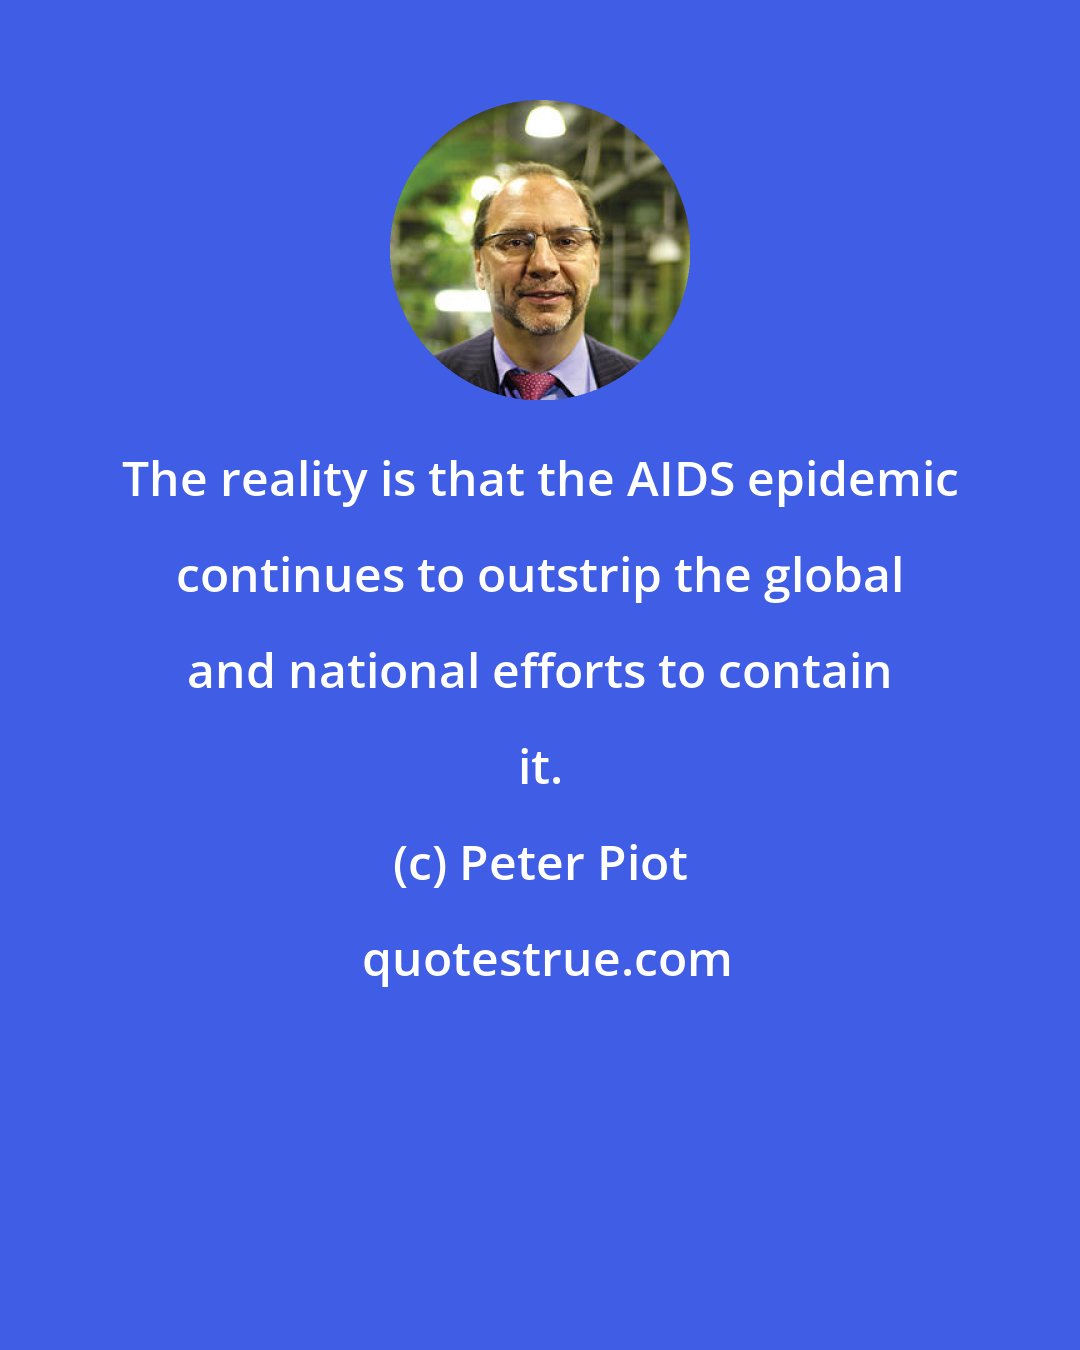 Peter Piot: The reality is that the AIDS epidemic continues to outstrip the global and national efforts to contain it.